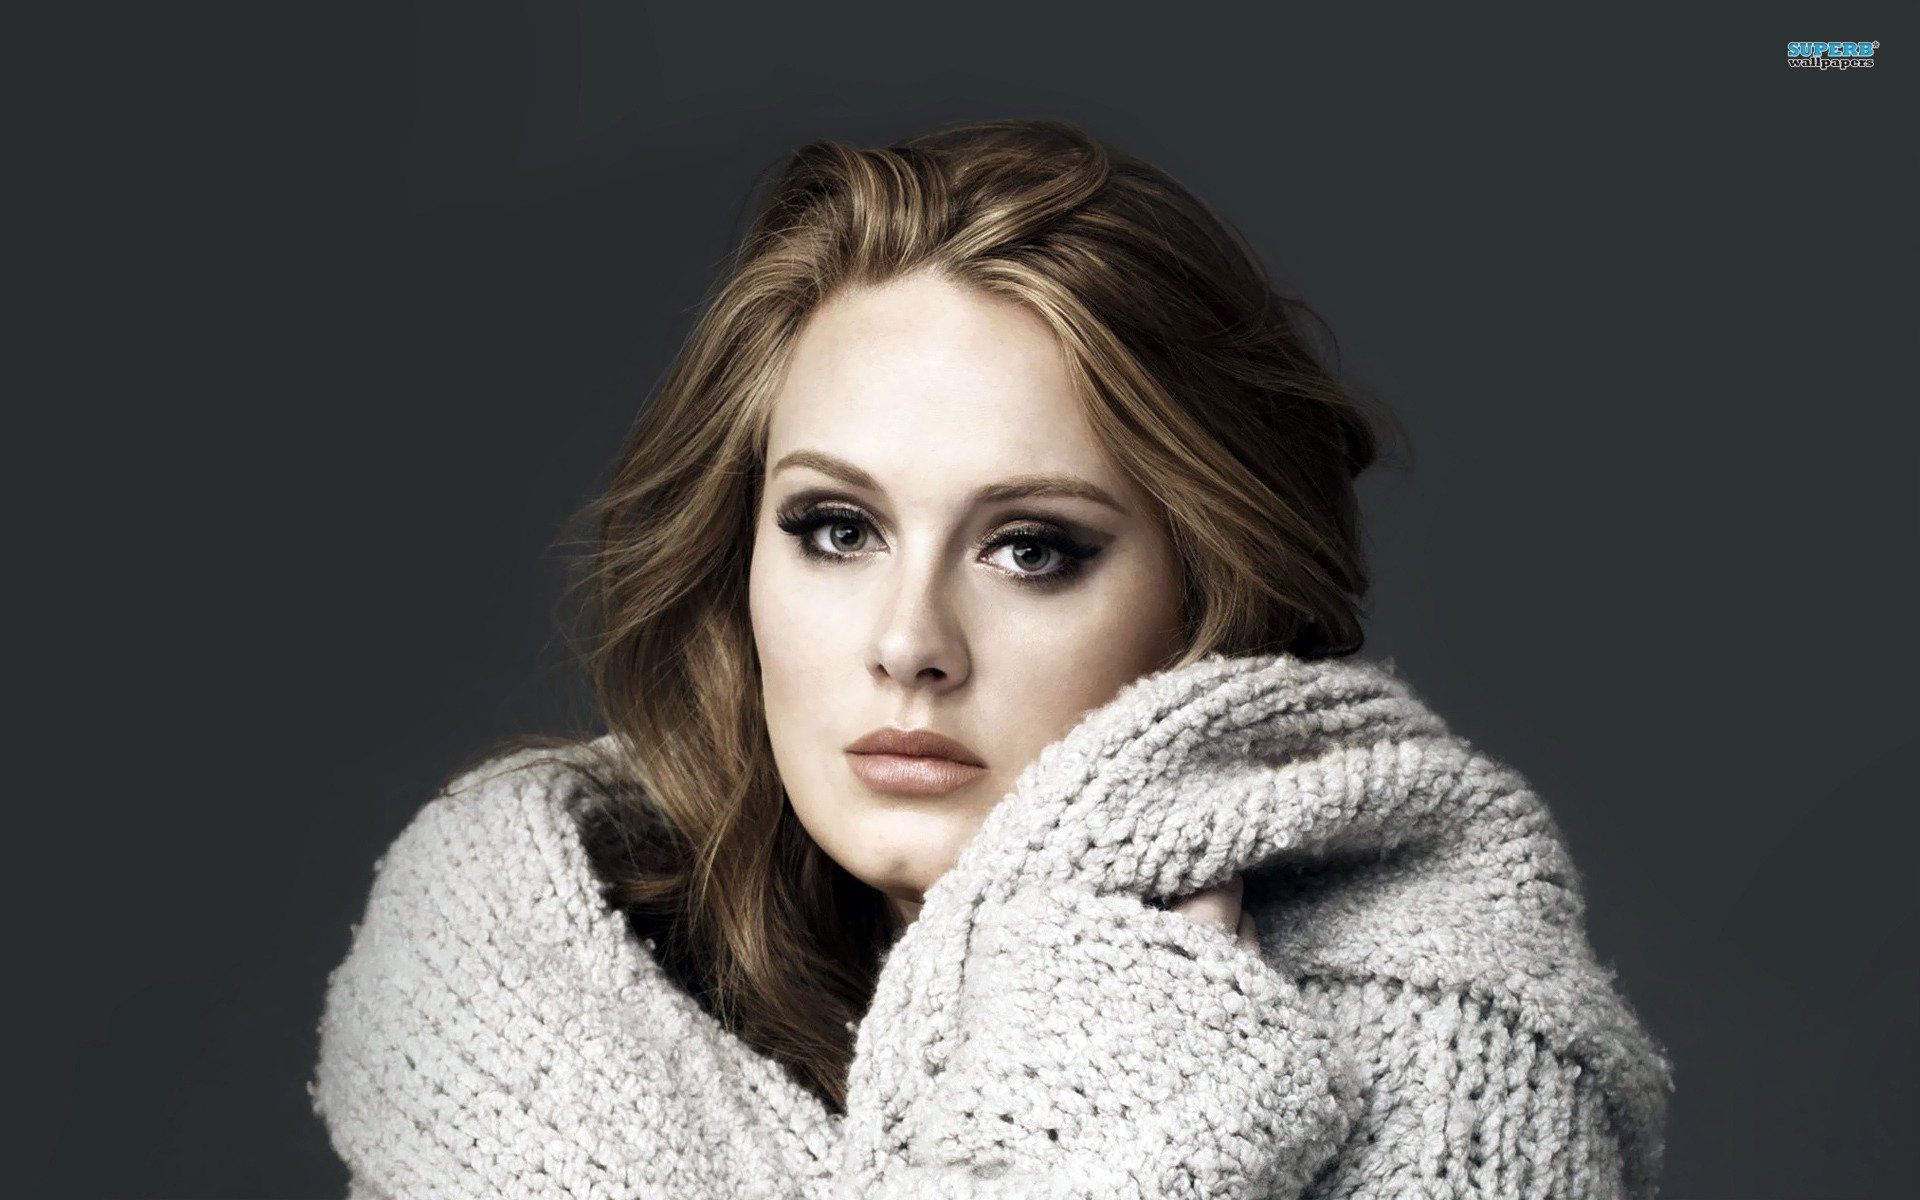 Adele Reveals Next Album Release While Performing At Friend’s Wedding